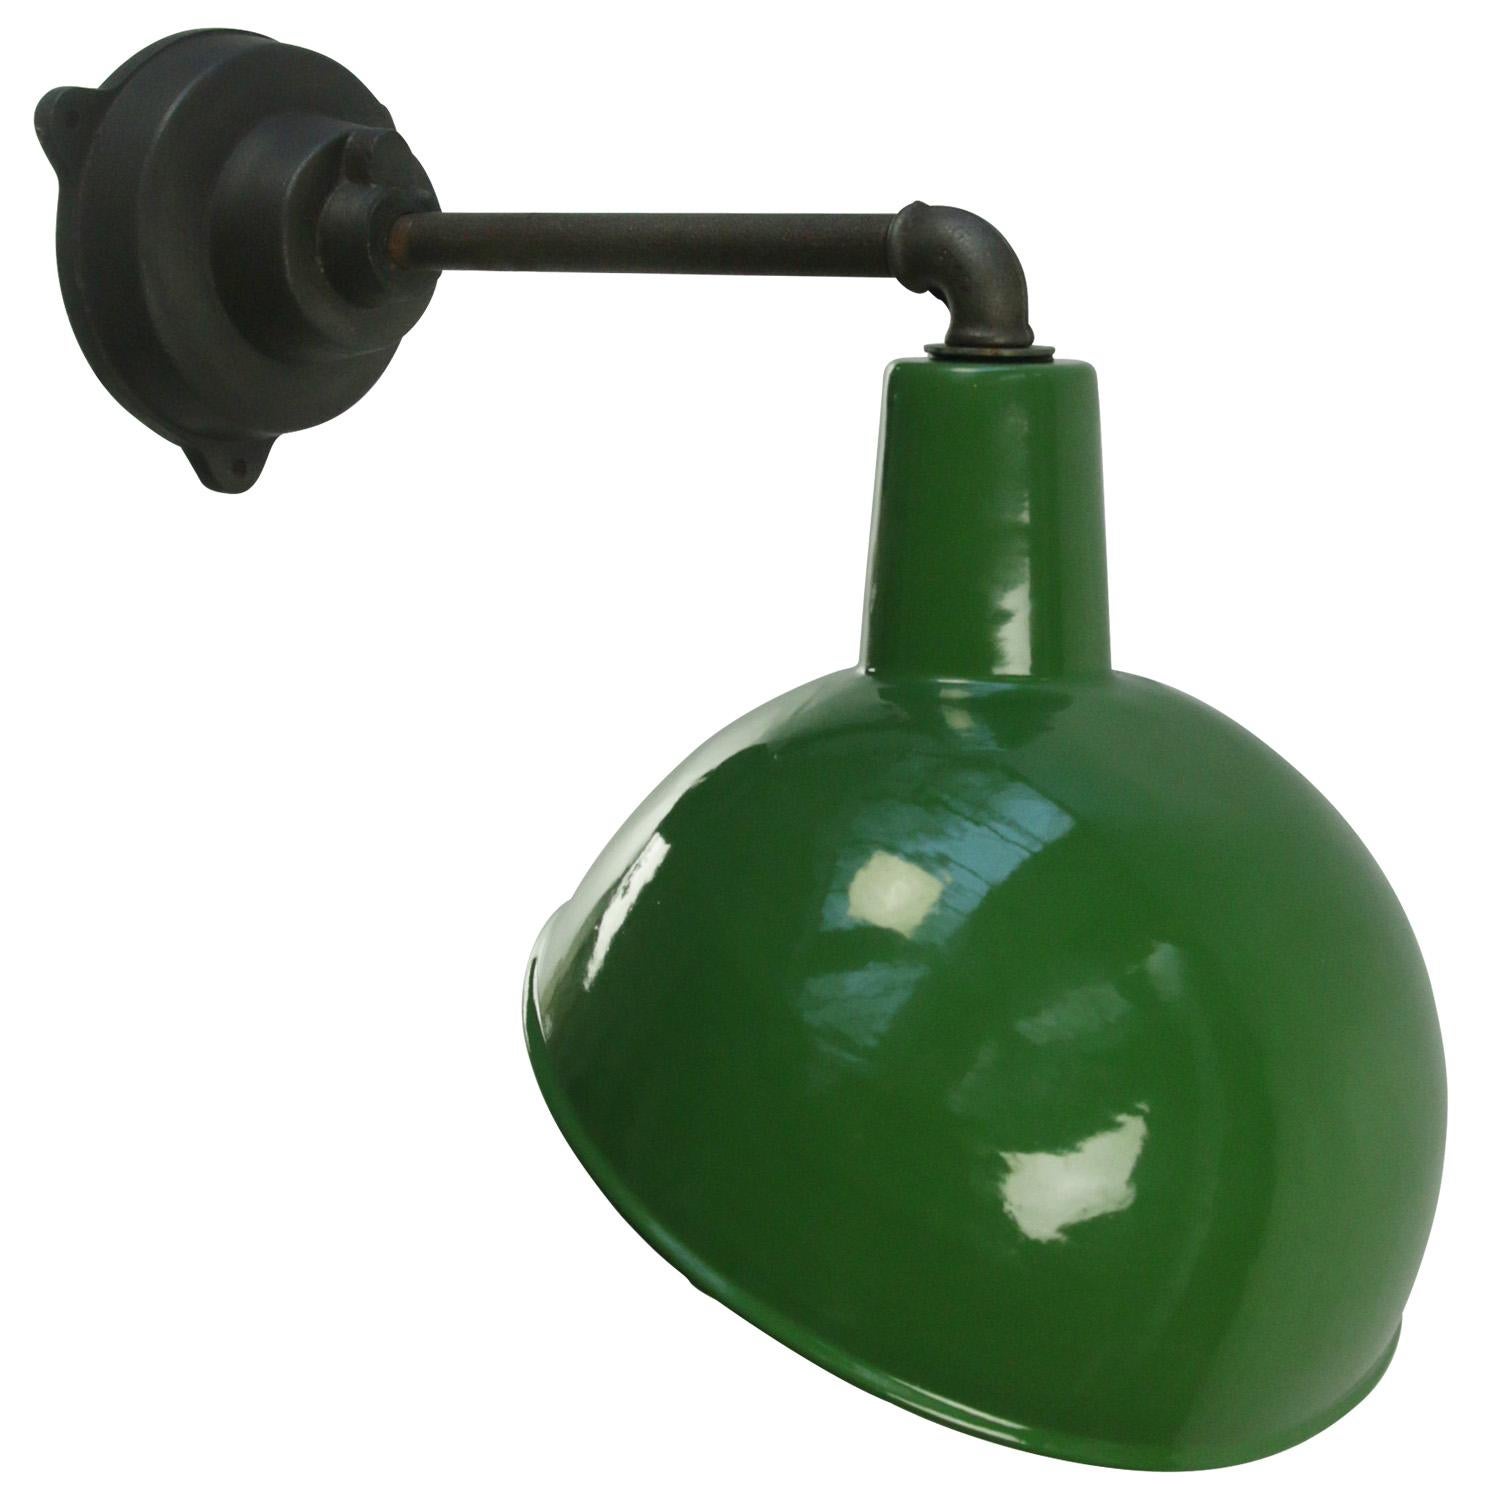 Factory wall light. Green enamel. White interior. Measures: 
Diameter cast iron wall piece 12 cm, 3 holes to secure.

Weight: 2.9 kg / 6.4 lb

Priced per individual item. All lamps have been made suitable by international standards for